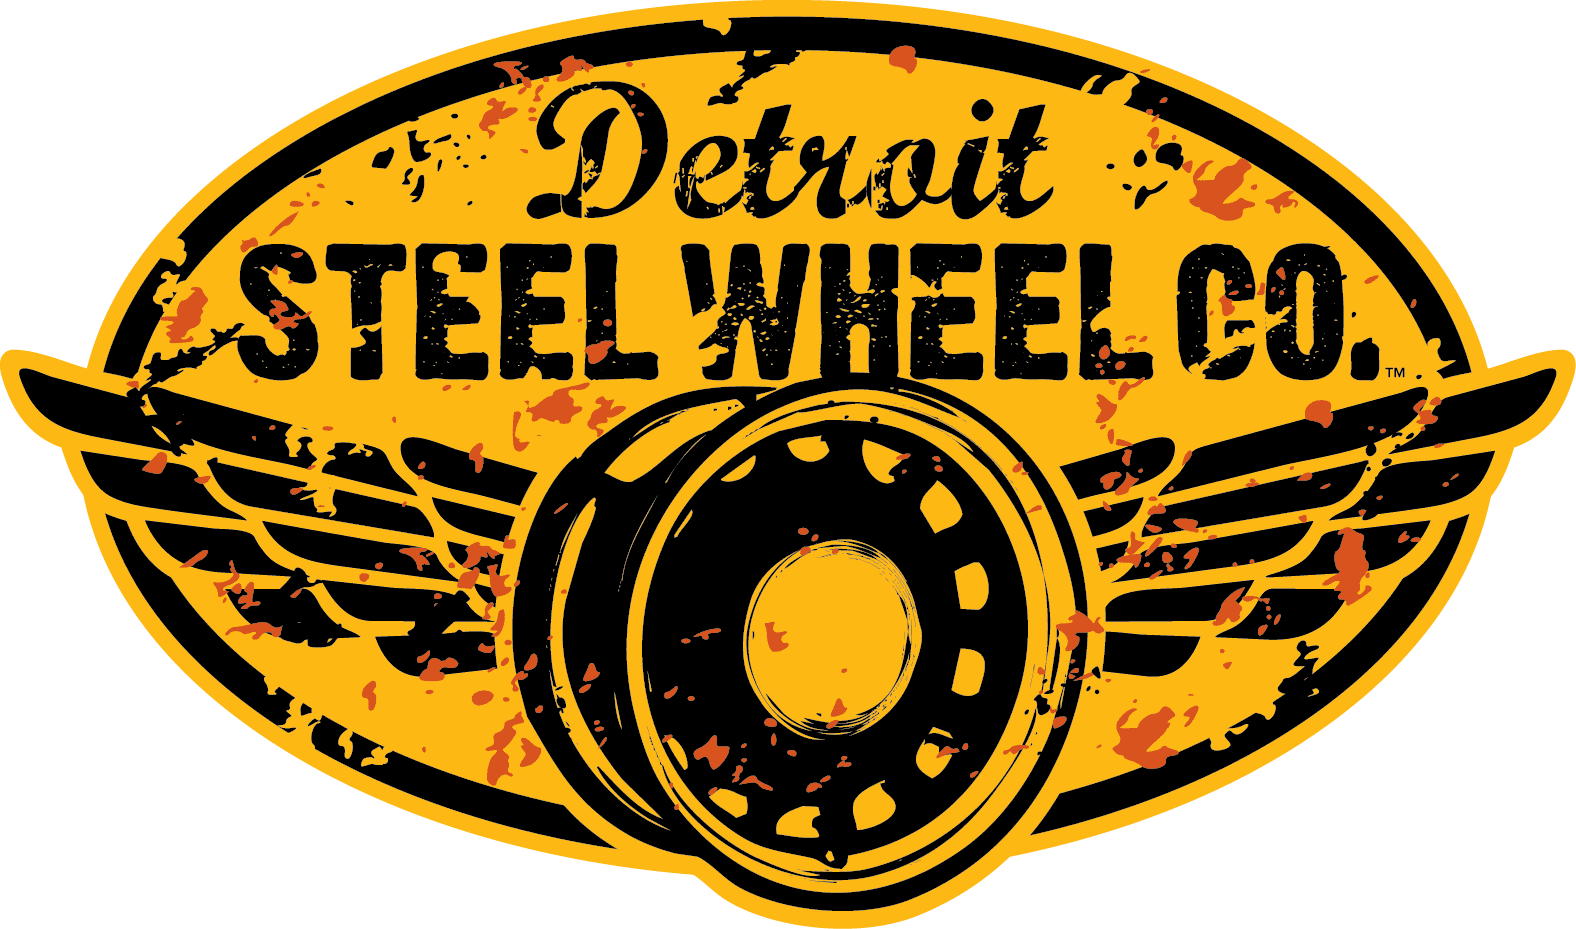 A yellow and black logo for detroit steel wheel company.